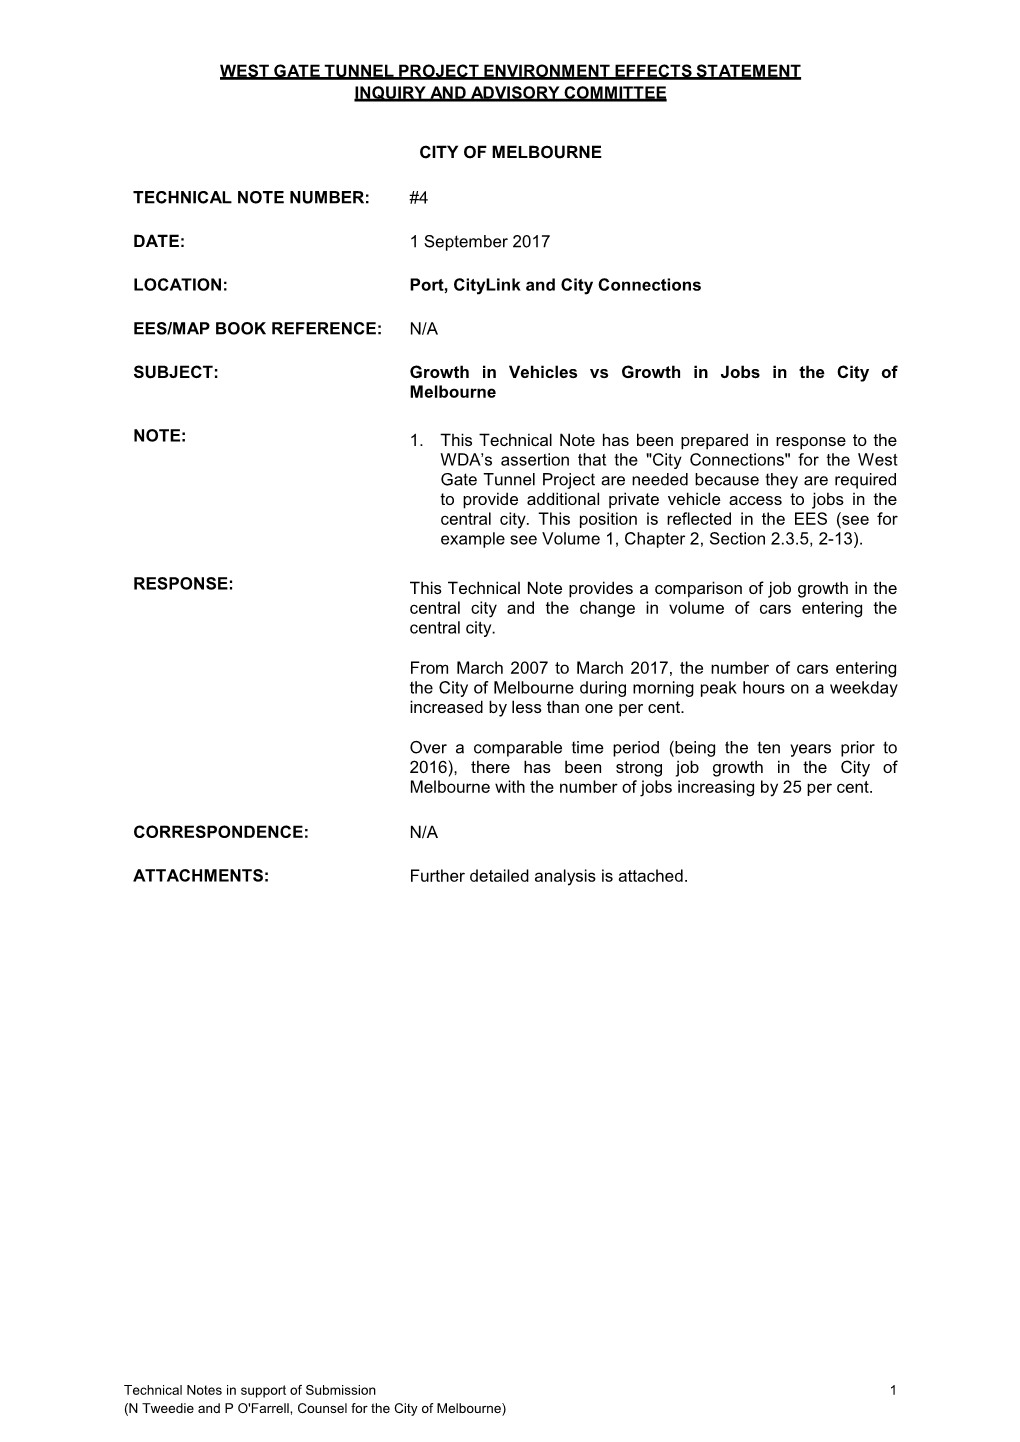 West Gate Tunnel Project Environment Effects Statement Inquiry and Advisory Committee